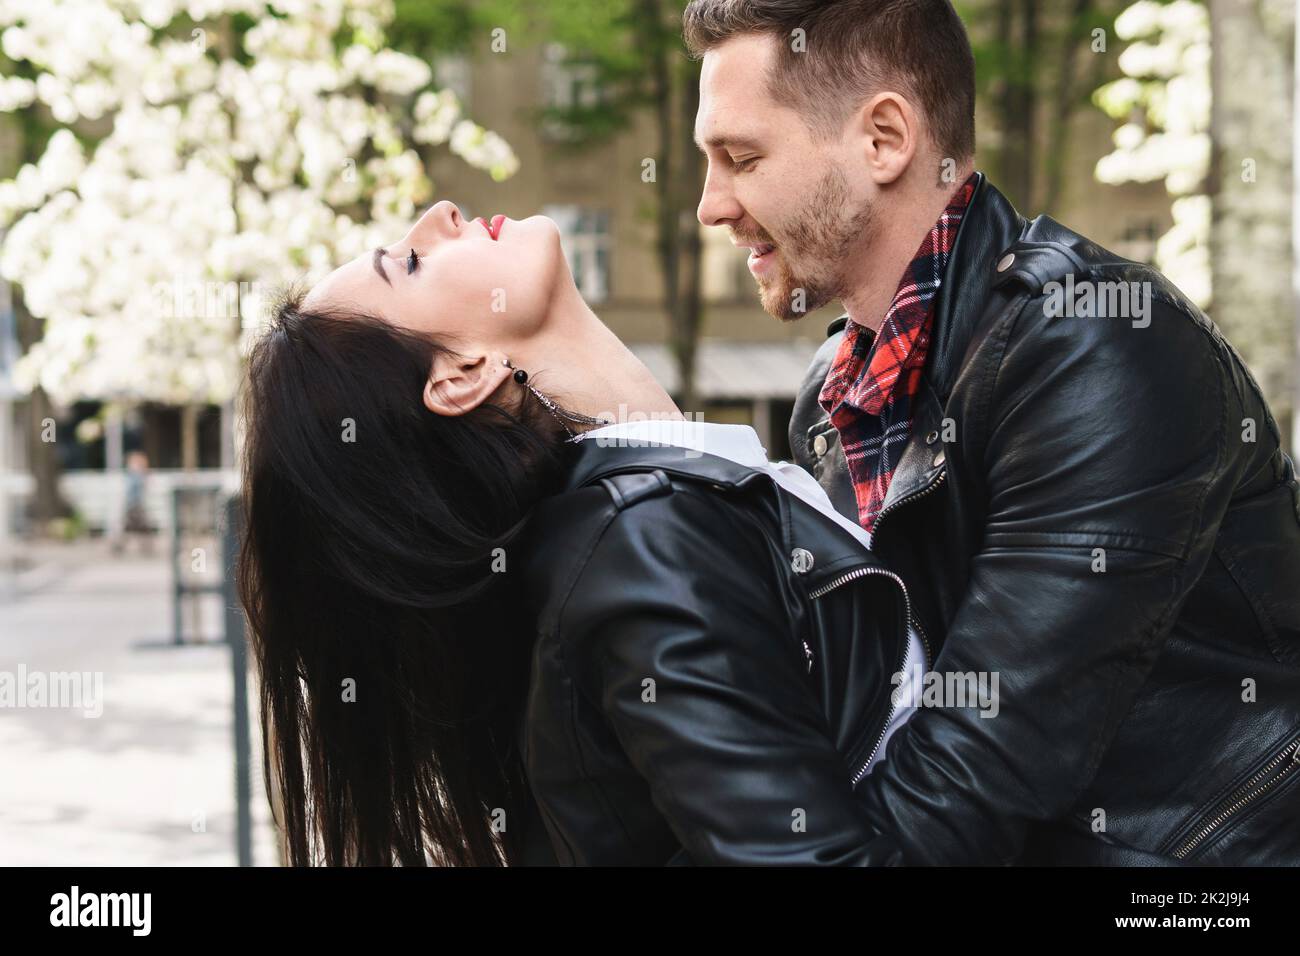 Beautiful couple in love wearing leather jackets during a date on a city street Stock Photo